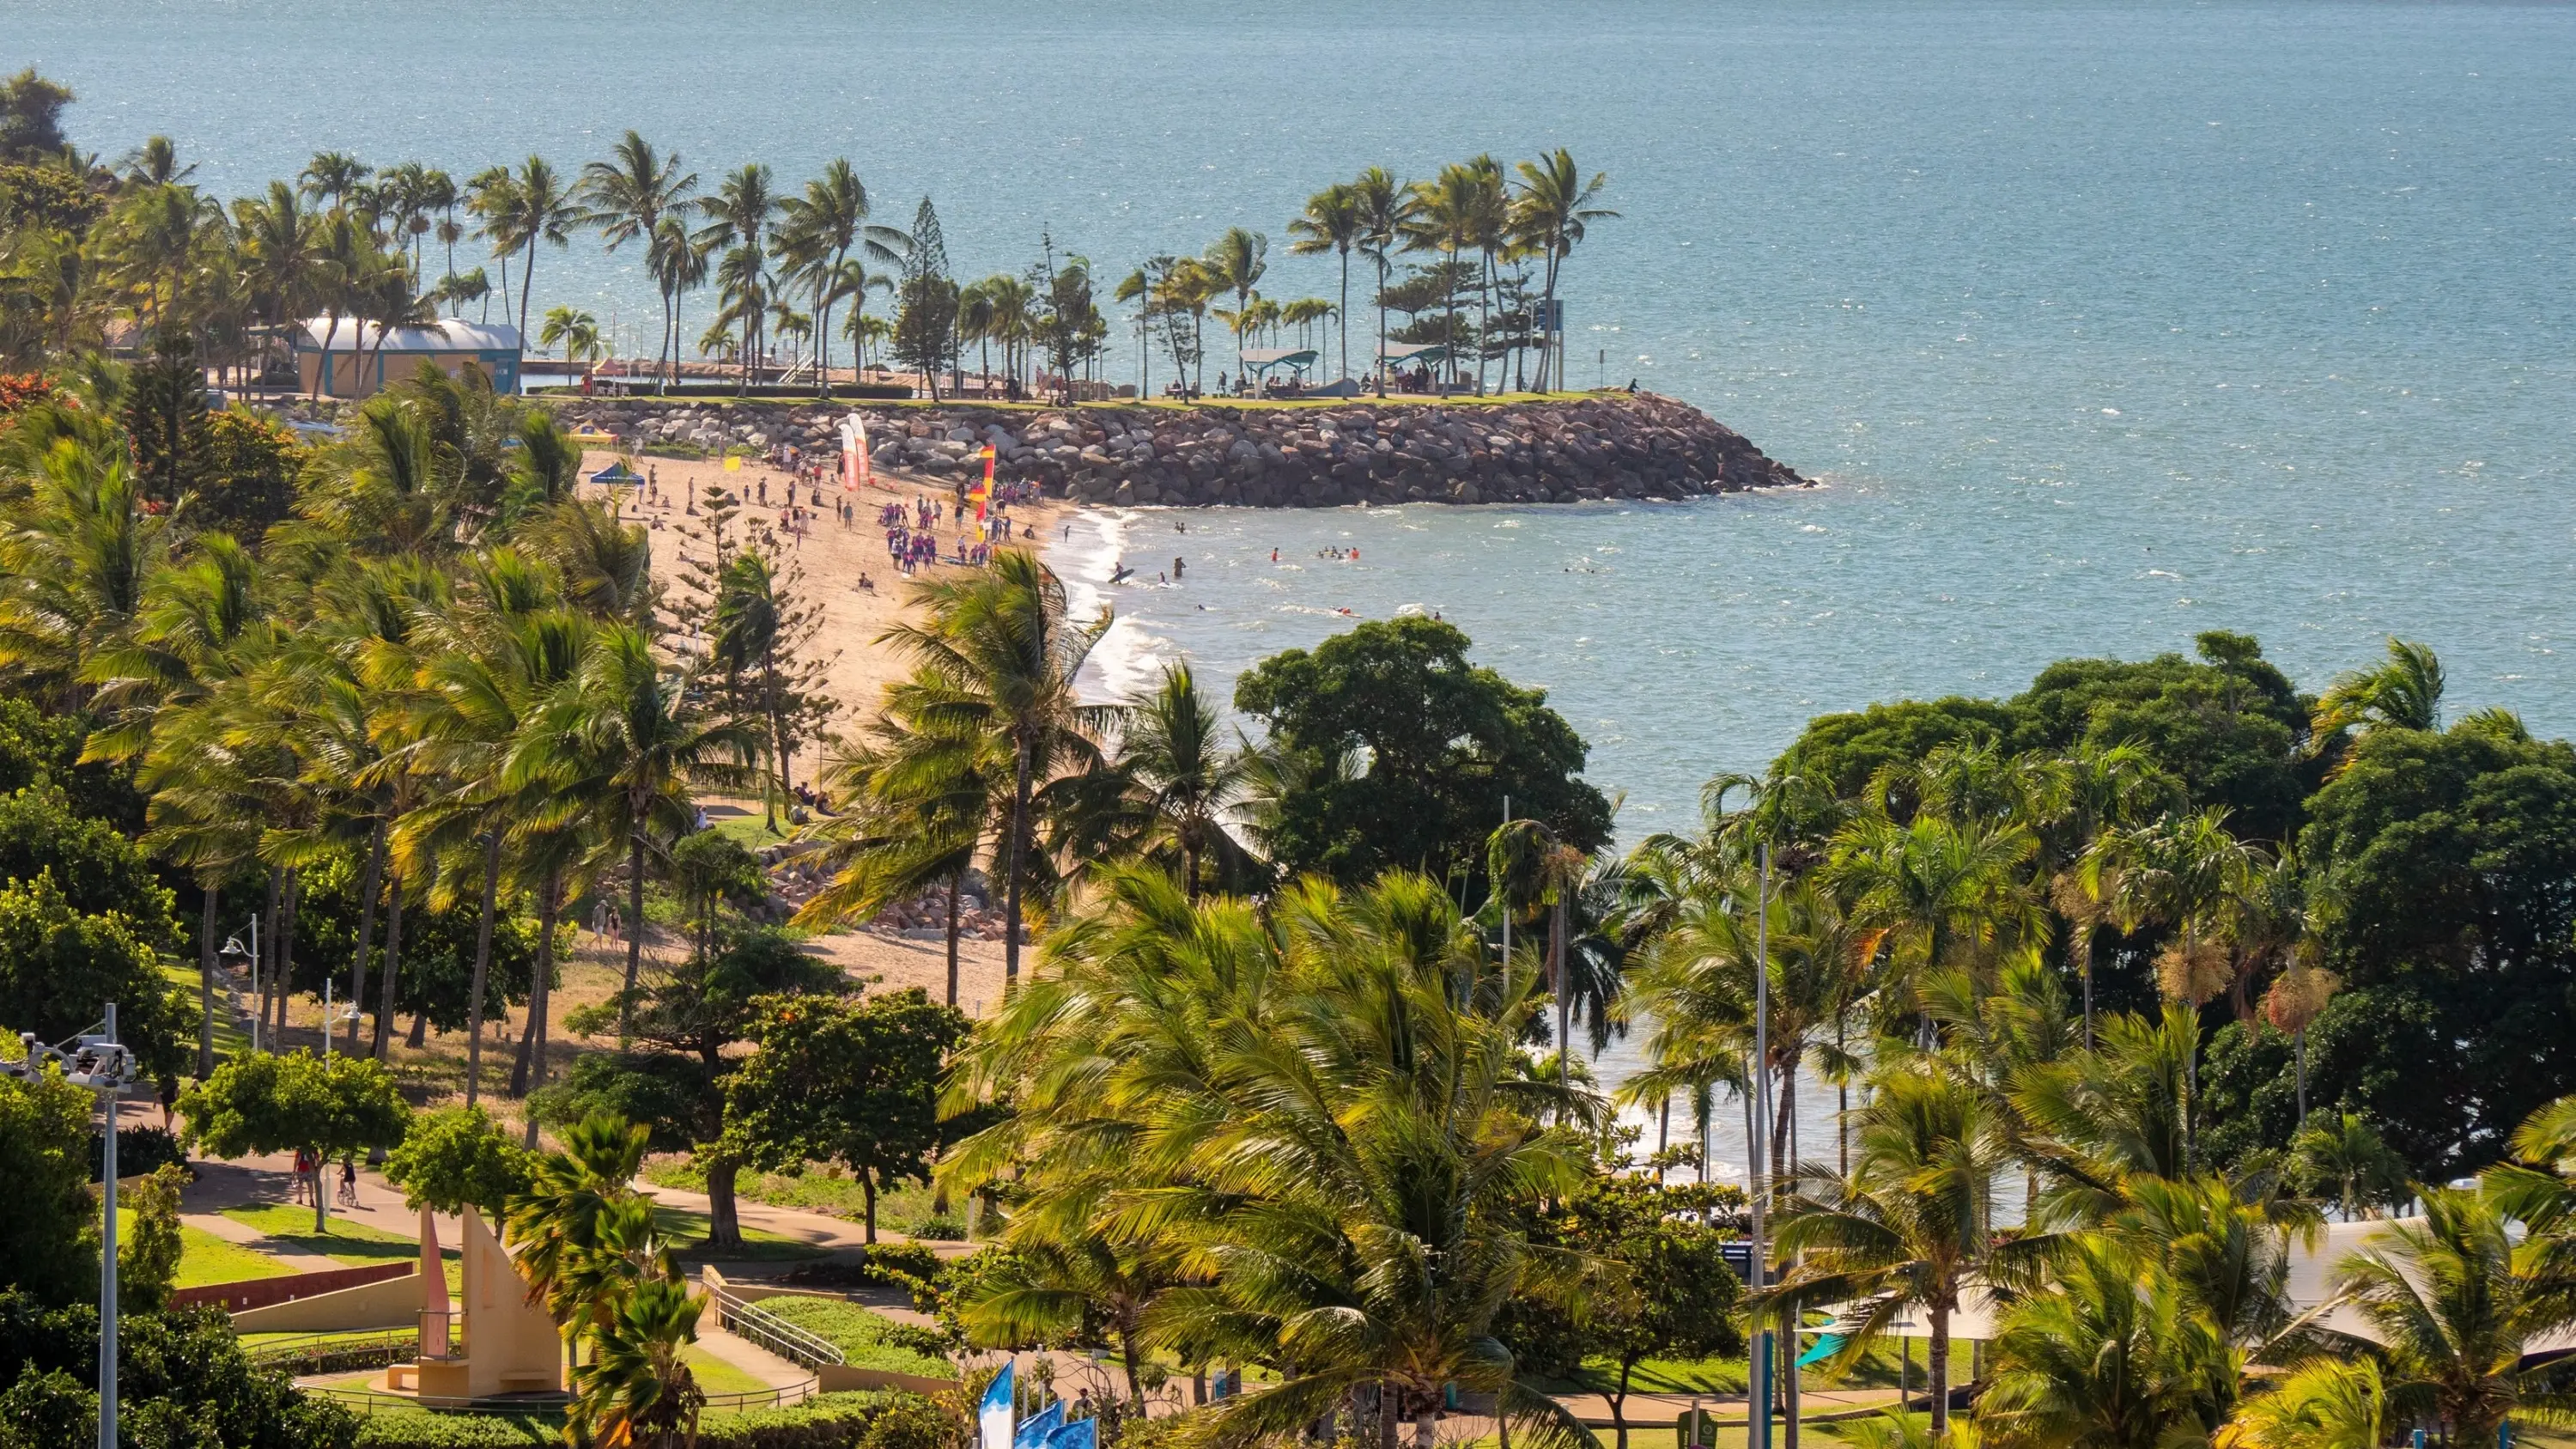 Aerial shot of palm lined waterfront and beach. Image credit: Tourism and Events Queensland